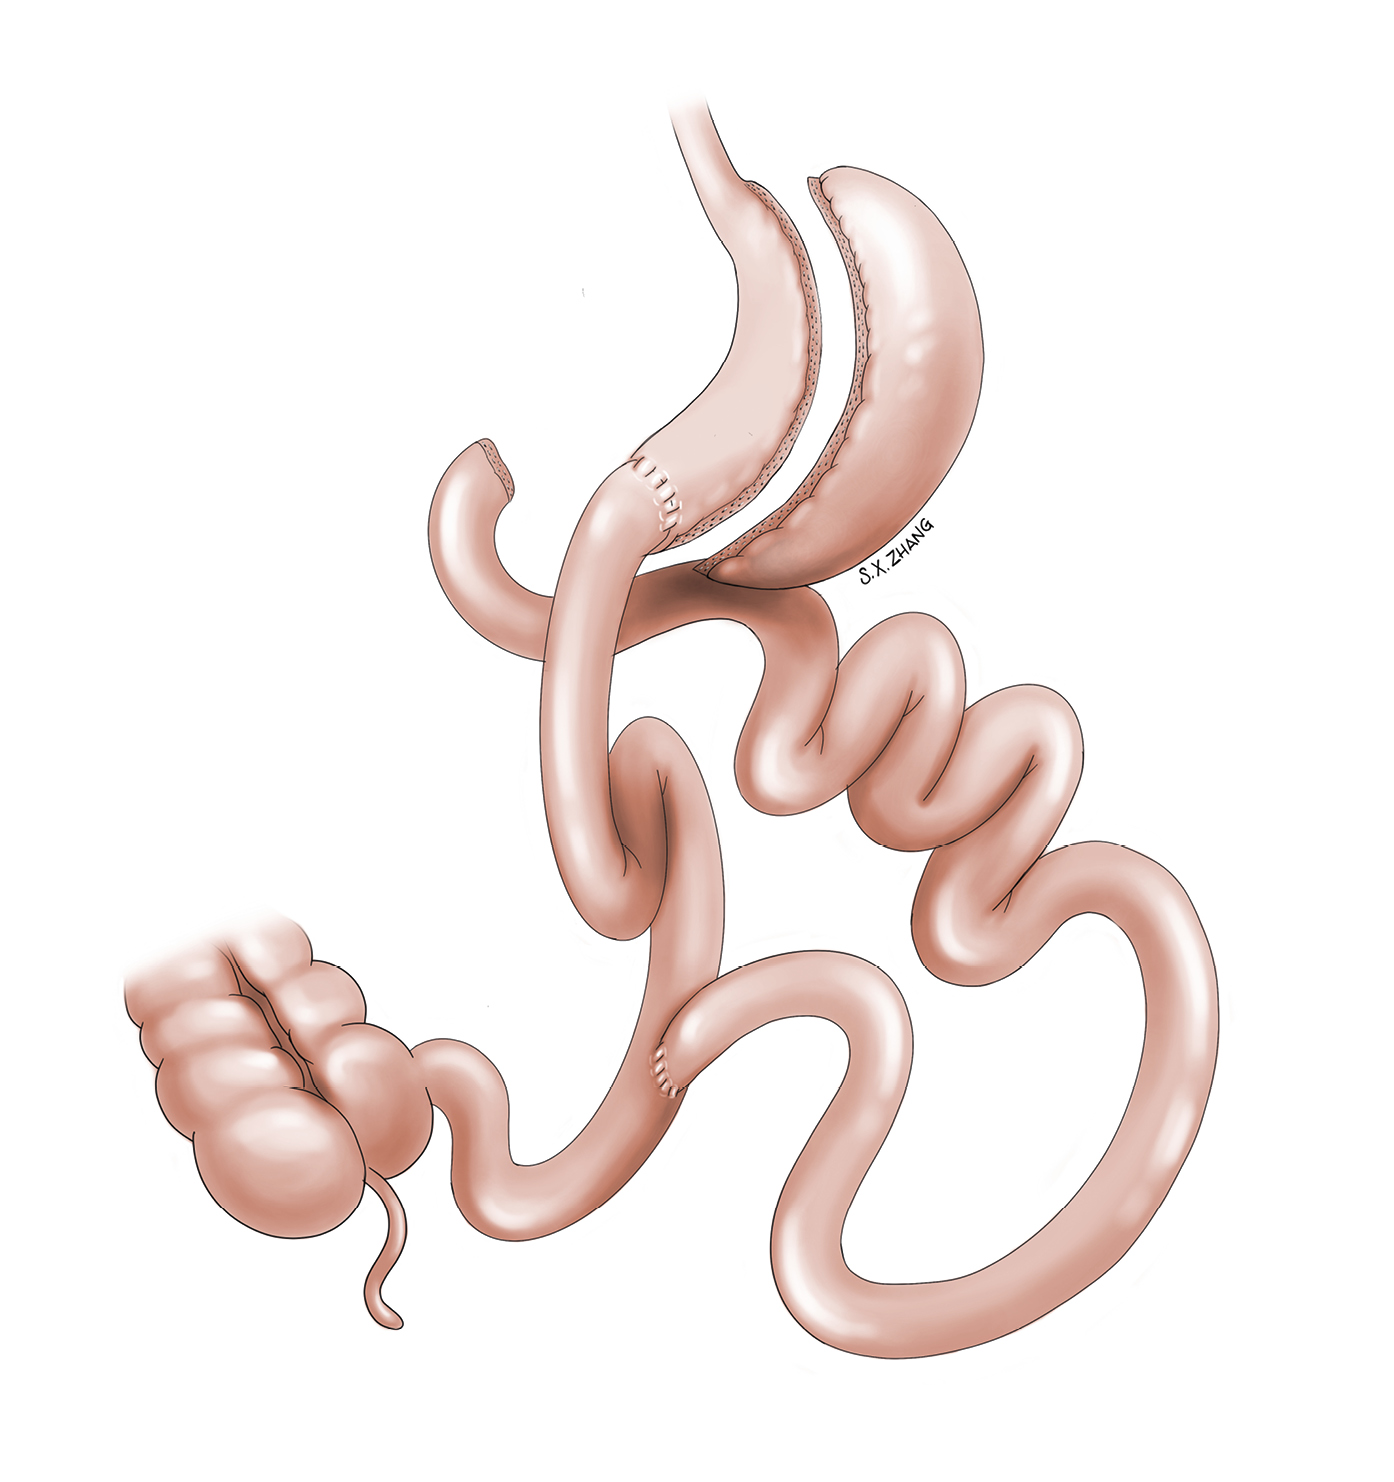 Figure 031_4090.  Biliopancreatic diversion with duodenal switch.  Illustration courtesy of Dr Shannon Zhang.  